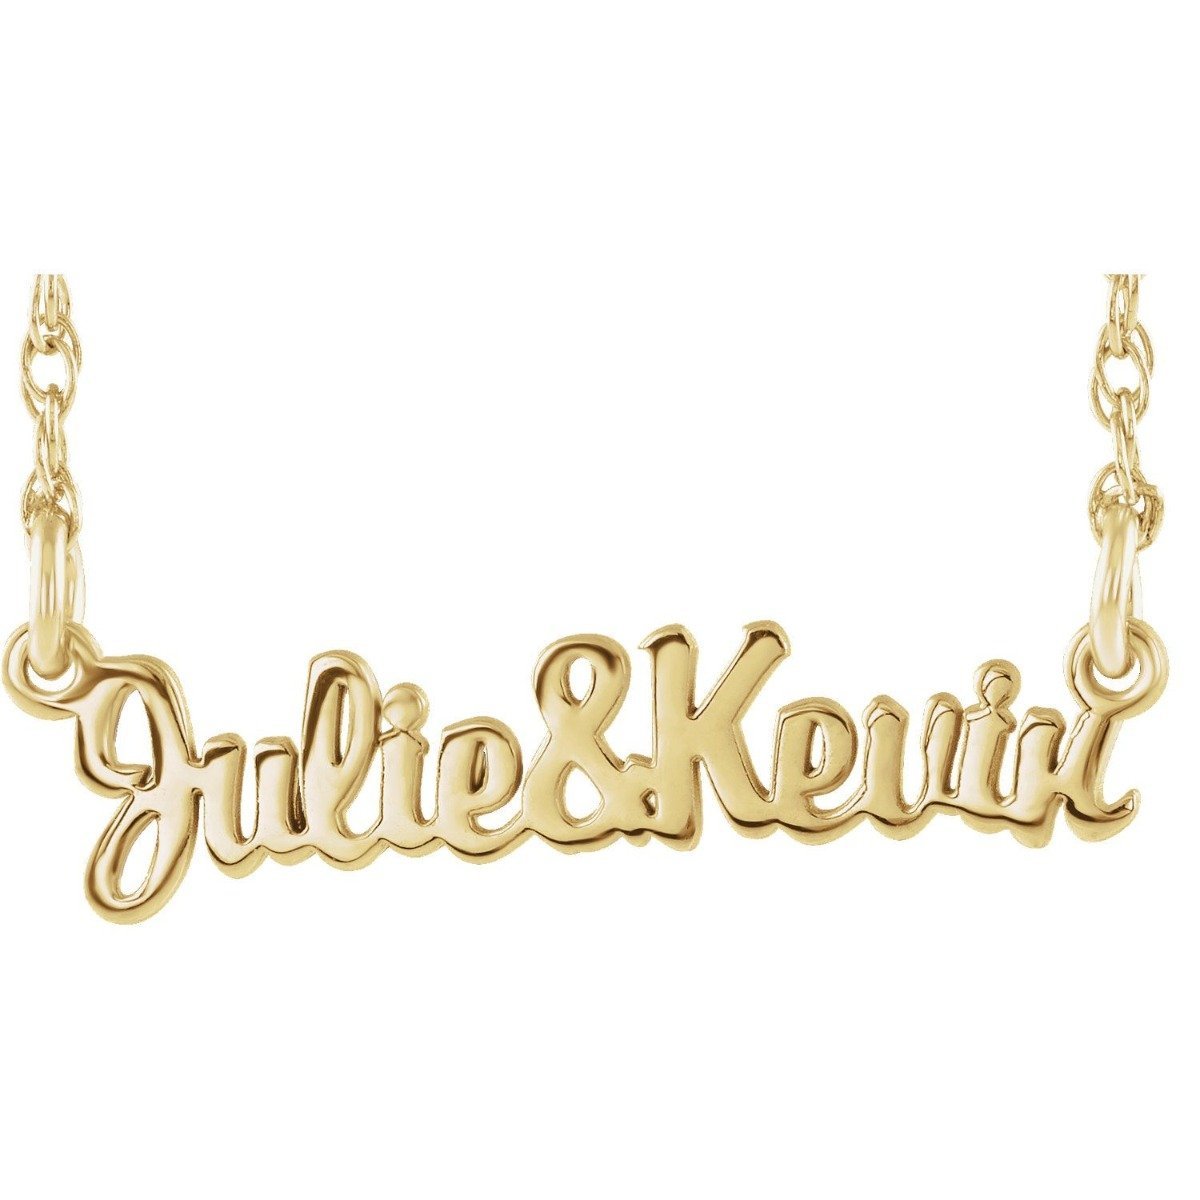 14KT GOLD SCRIPT COUPLES NAMEPLATE NECKLACE 16 Inches / 14KT Gold / Yellow,16 Inches / Sterling Silver / Yellow,18 Inches / 14KT Gold / Yellow,18 Inches / Sterling Silver / Yellow